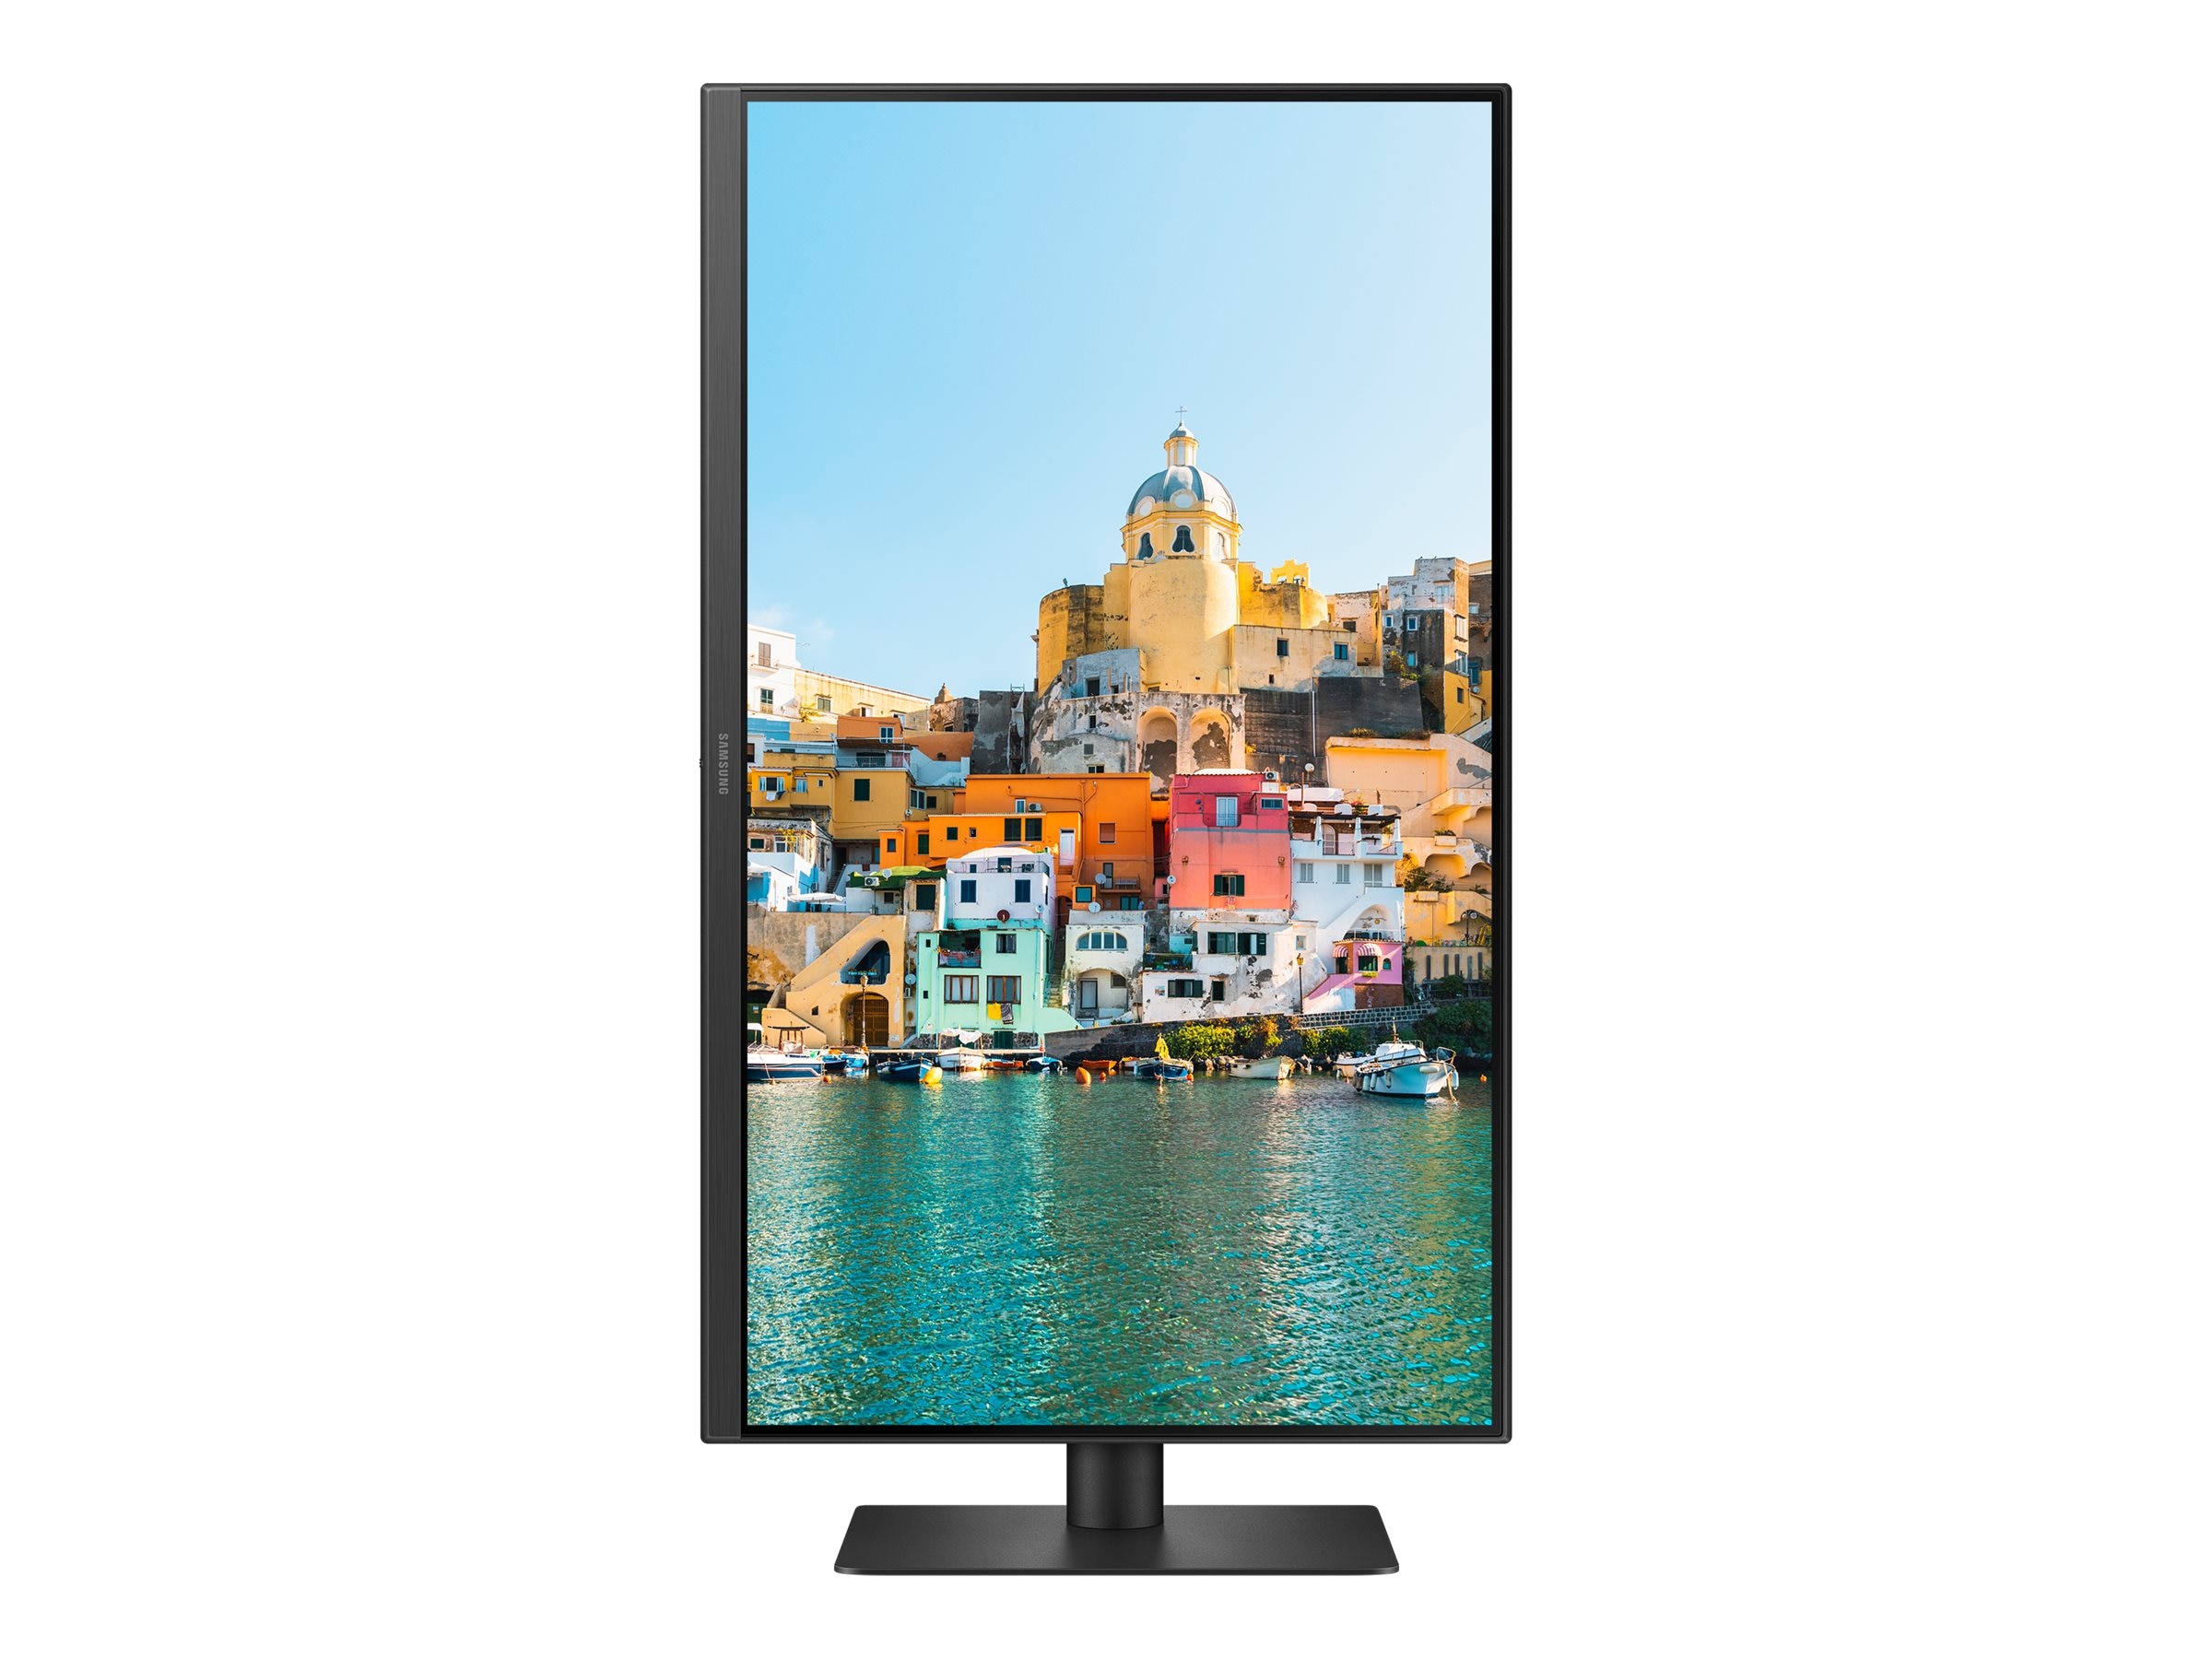 Samsung 850 S32D850T 32" LED LCD Monitor 